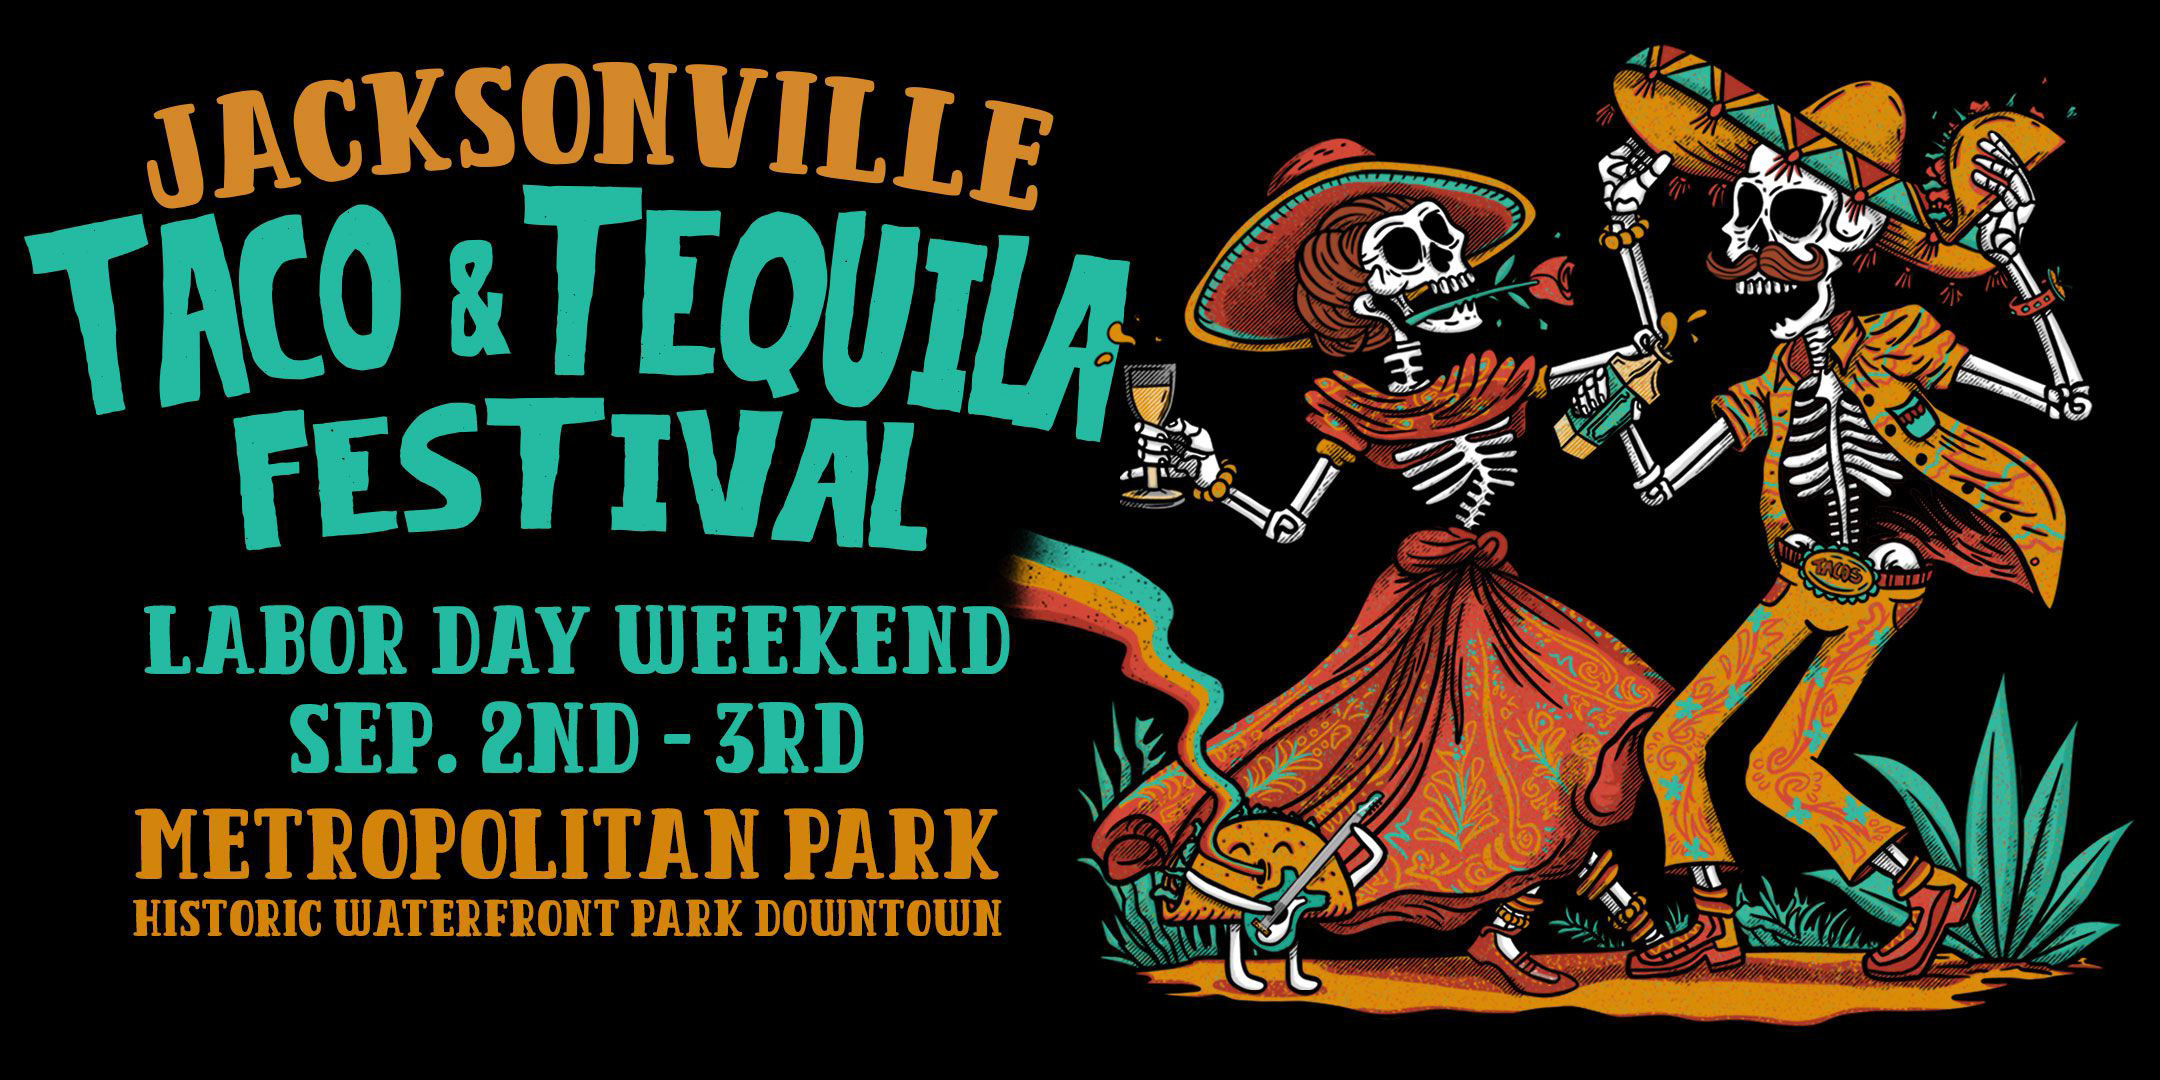 The Jacksonville Taco & Tequila Festival will be coming to downtown